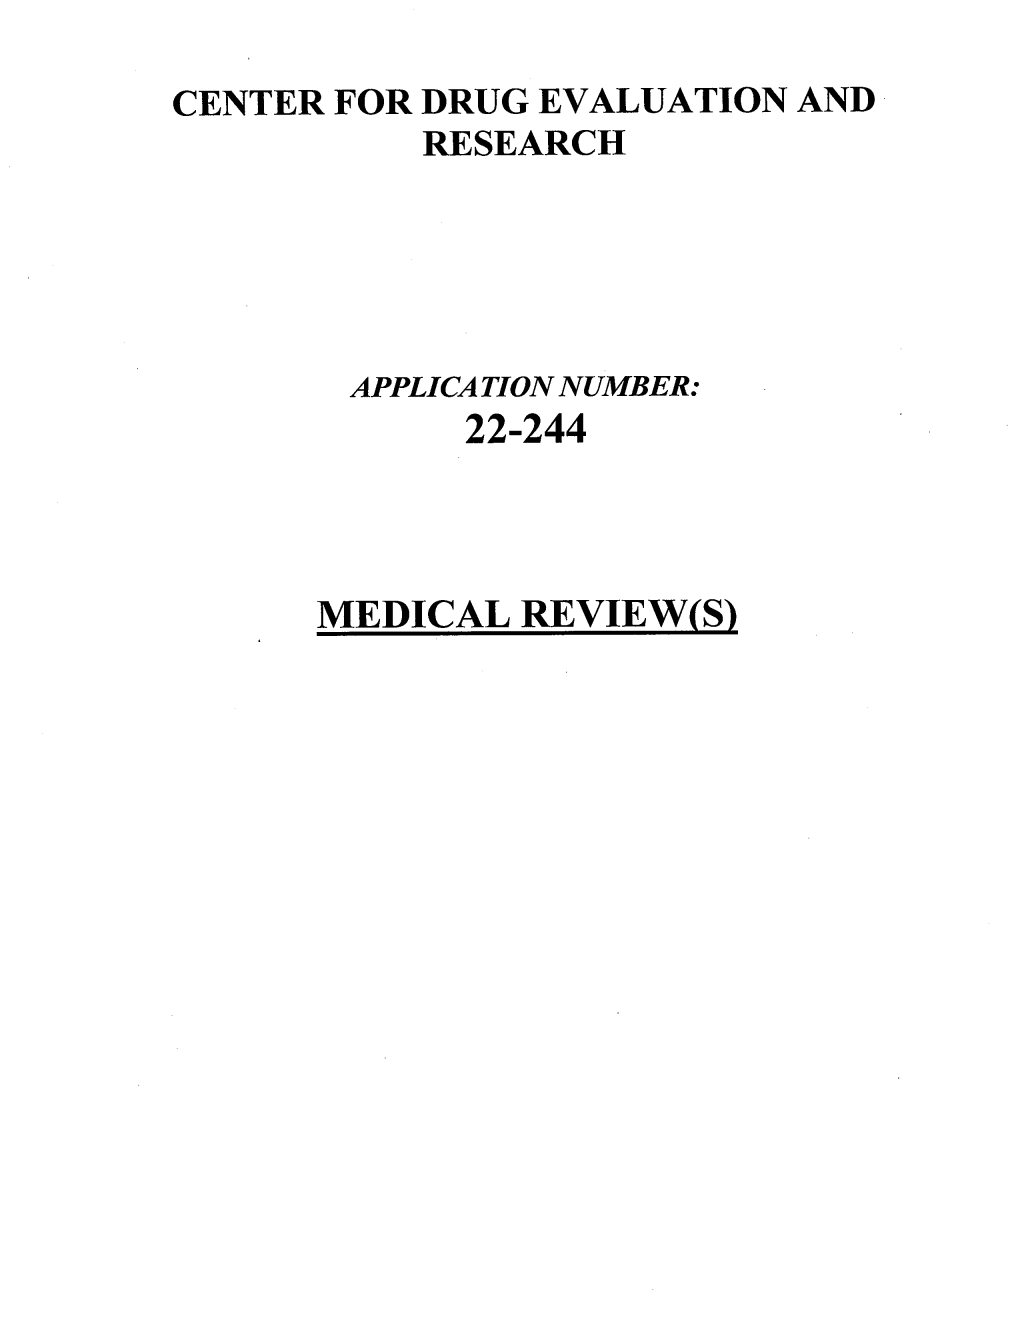 22-244 Medical Review(S)